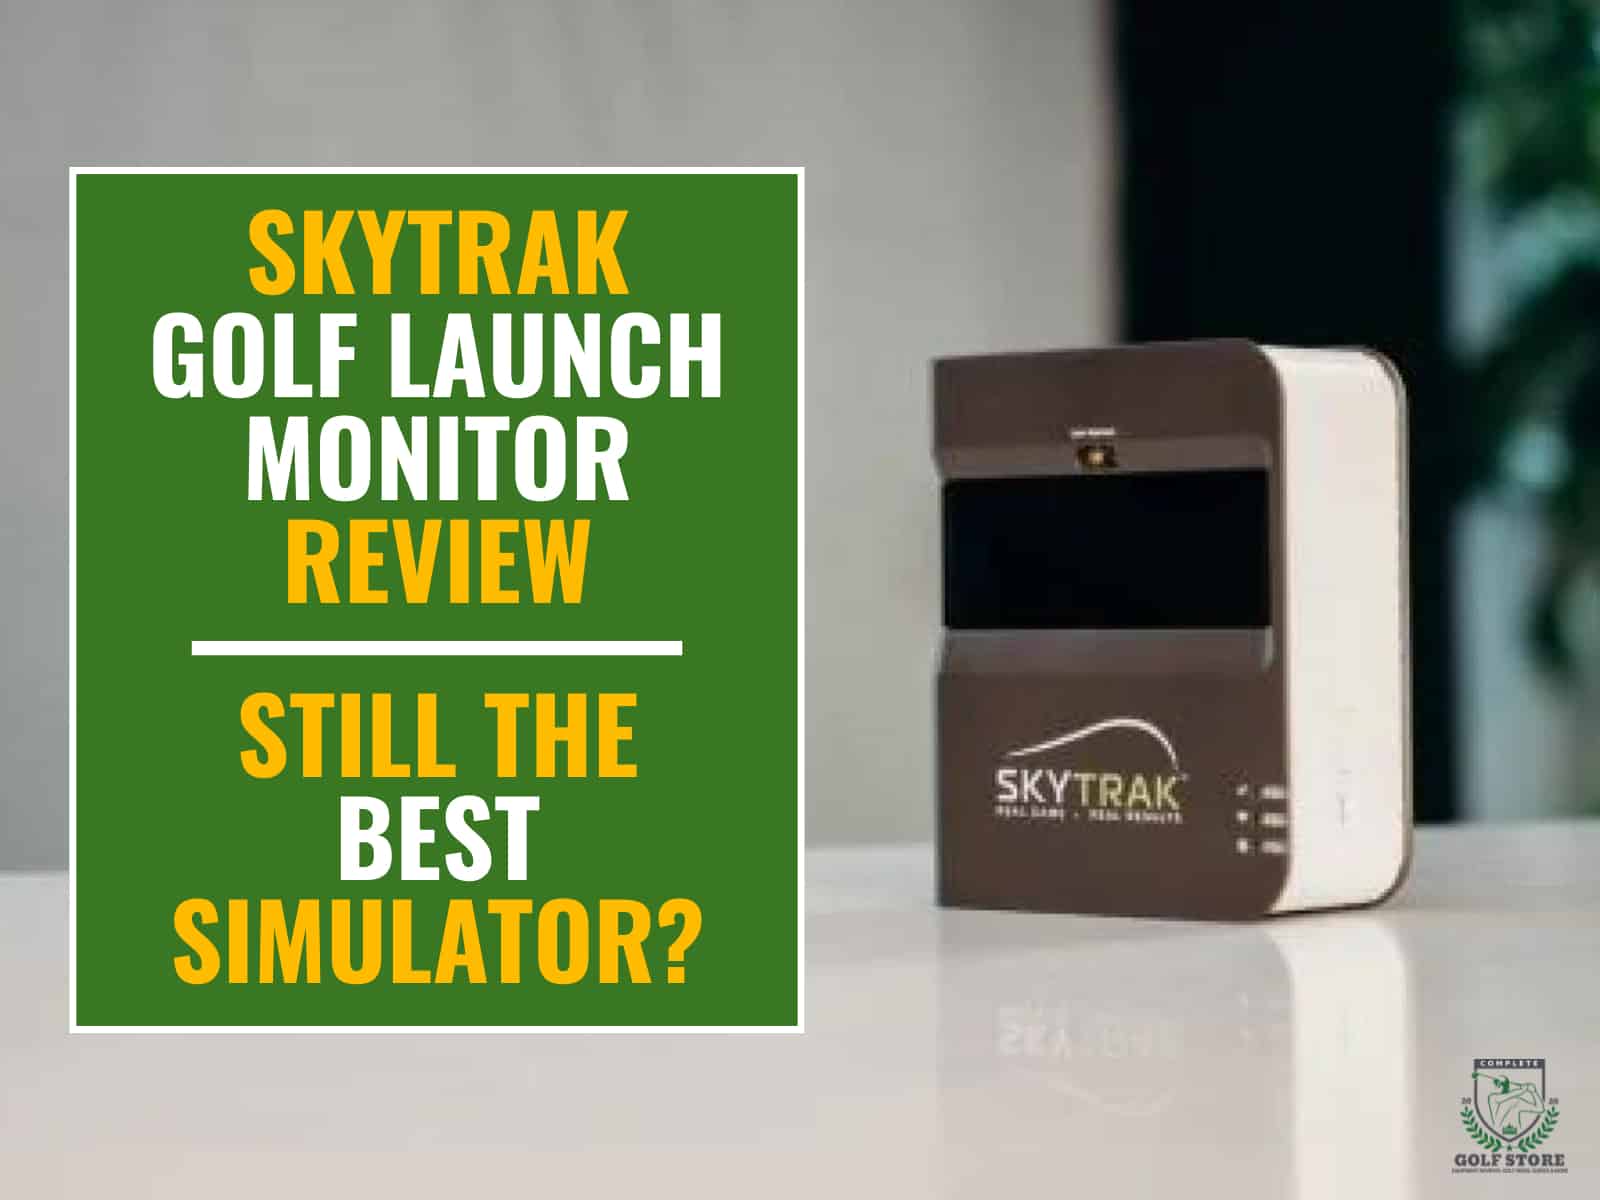 SkyTrak launch monitor on top of a counter. Green textbox on the left contains the text 